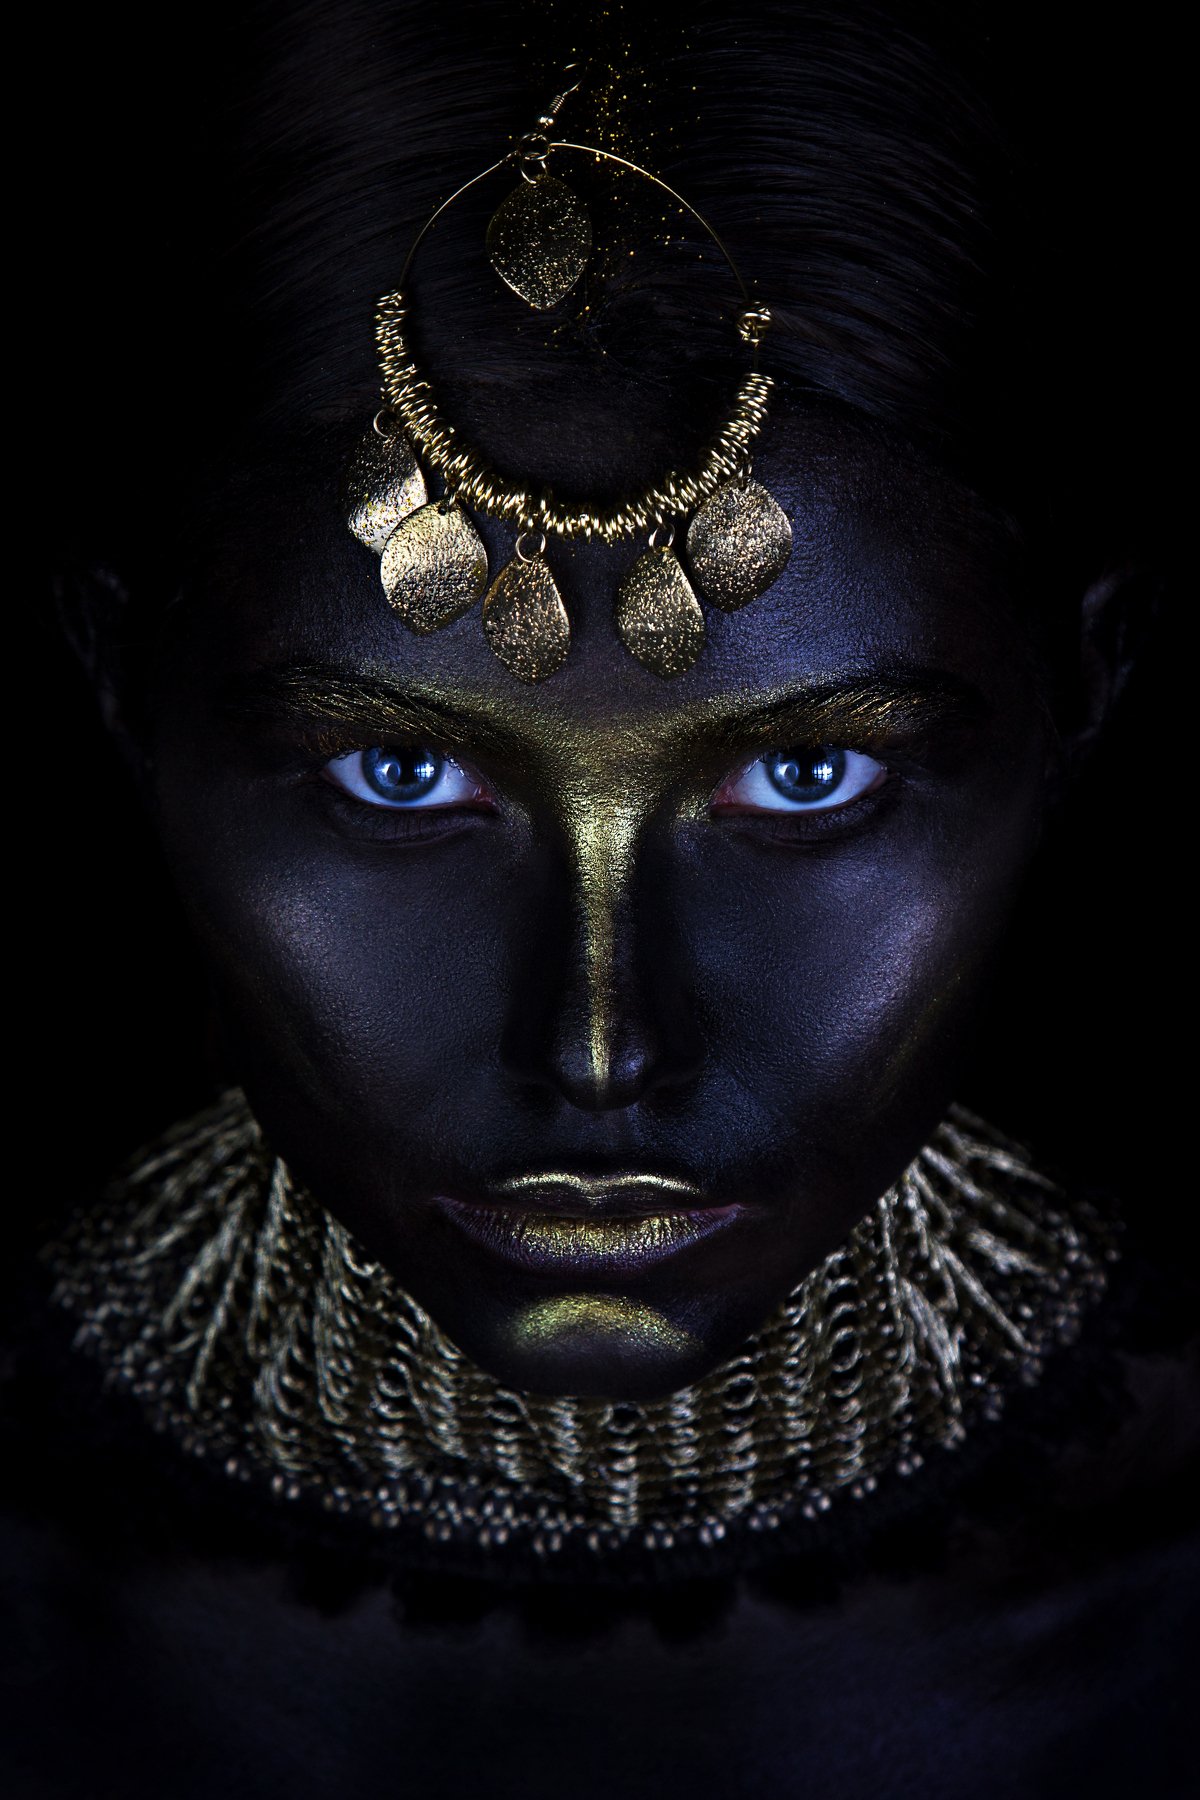 people, girl, portrait, makeup, art makeup, body painting, art, eyes, low key, black, color, leather, texture, eyebrows, jewelry, gold, lips, neck, collar, Mayan, tribe, life, look, creative, vision, Ковалёв Иван